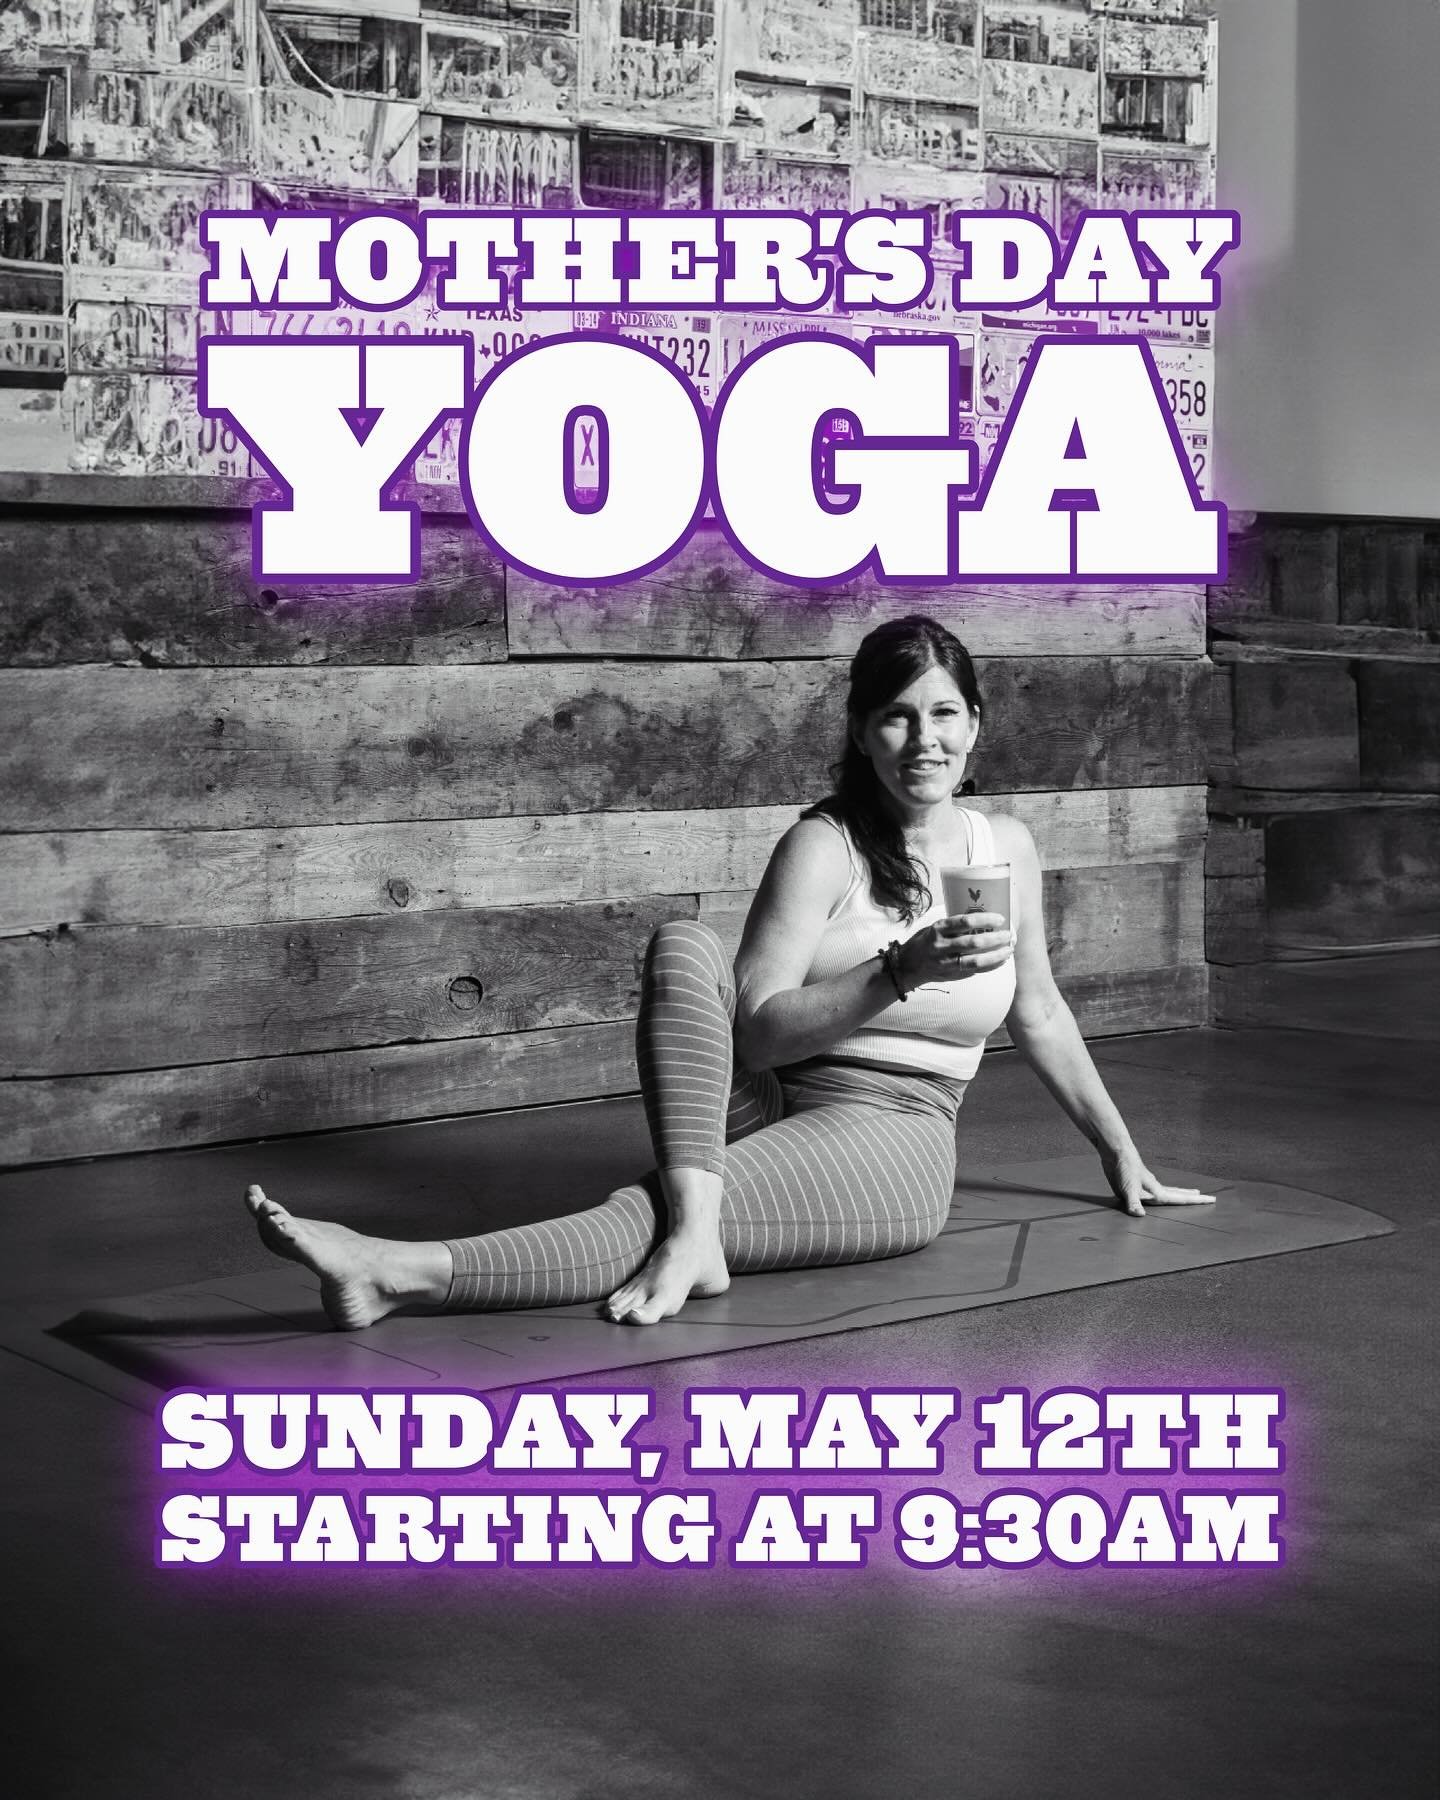 FOR ALL YOU MAMAS OUT THERE!🧘&zwj;♀️

Come get your stretch on with us on Sunday, May 12th! Julie Norton is teaching yoga on the 2nd Sunday of every month starting at 9:30am. $25 per person, your ticket includes your choice of a draft beer, mimosa o